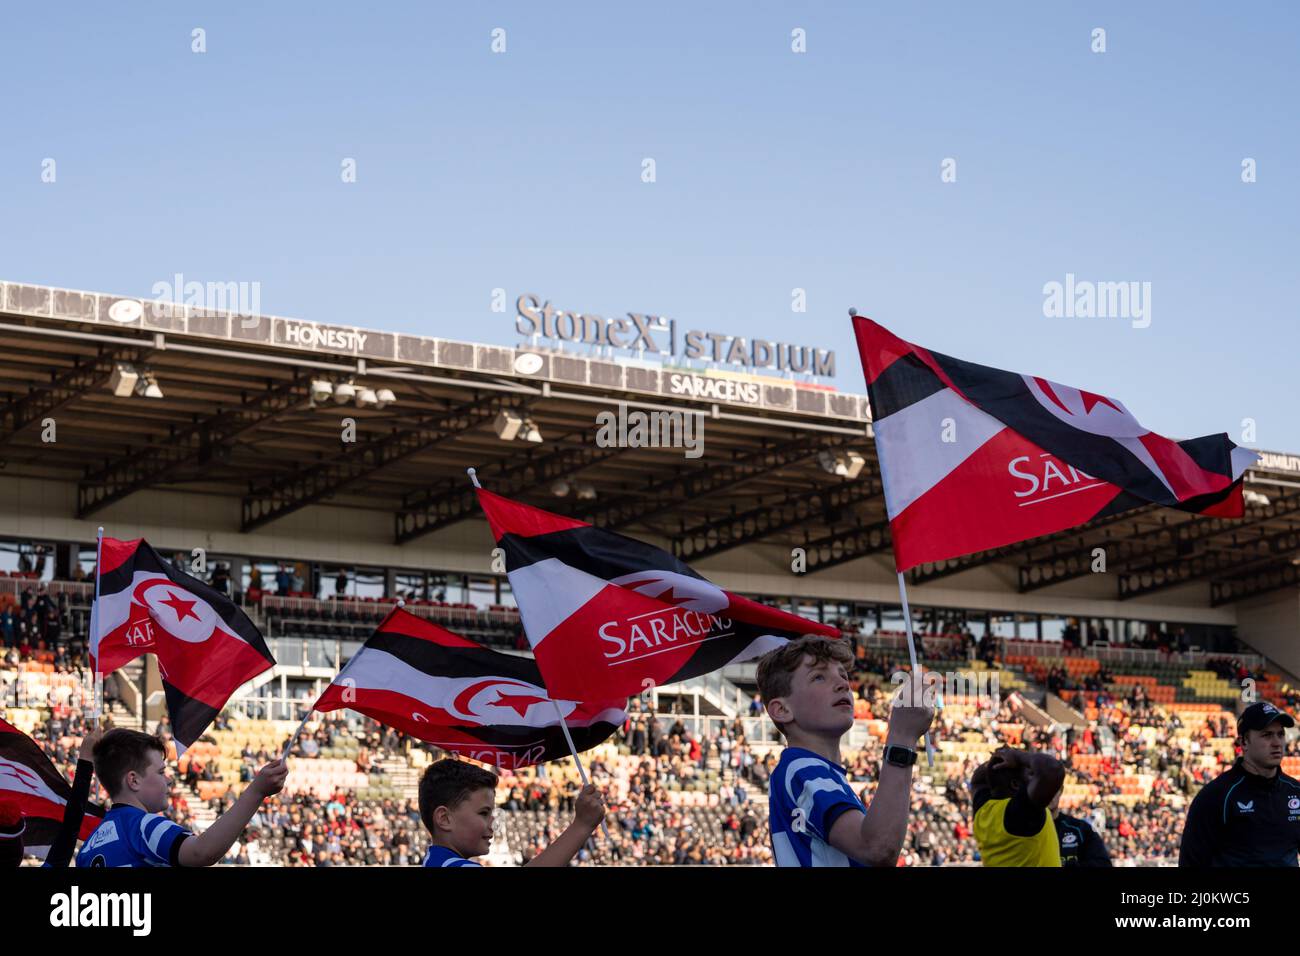 Junior Rugby Clubs wave their flags to welcome the Saracens players onto the pitch at the StoneX Stadium Stock Photo